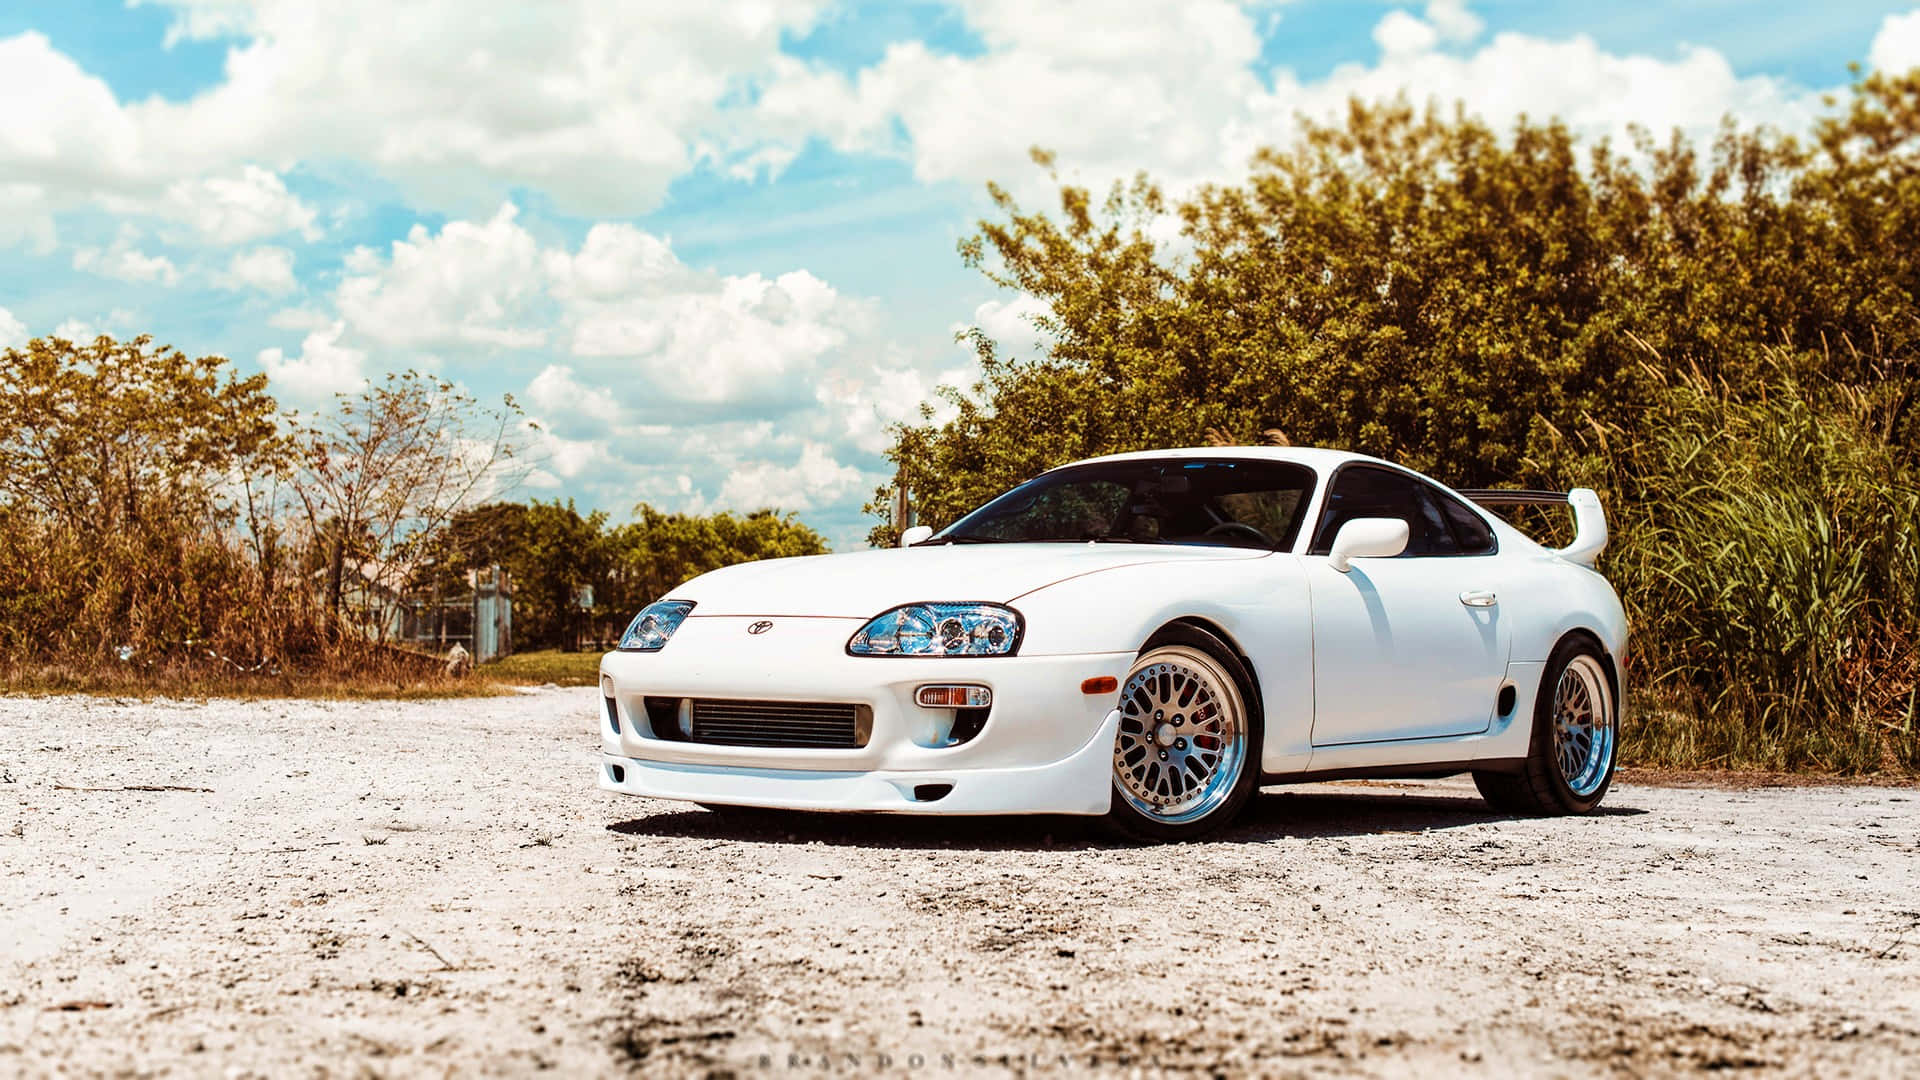 The iconic Jdm Supra is ready to hit the streets Wallpaper